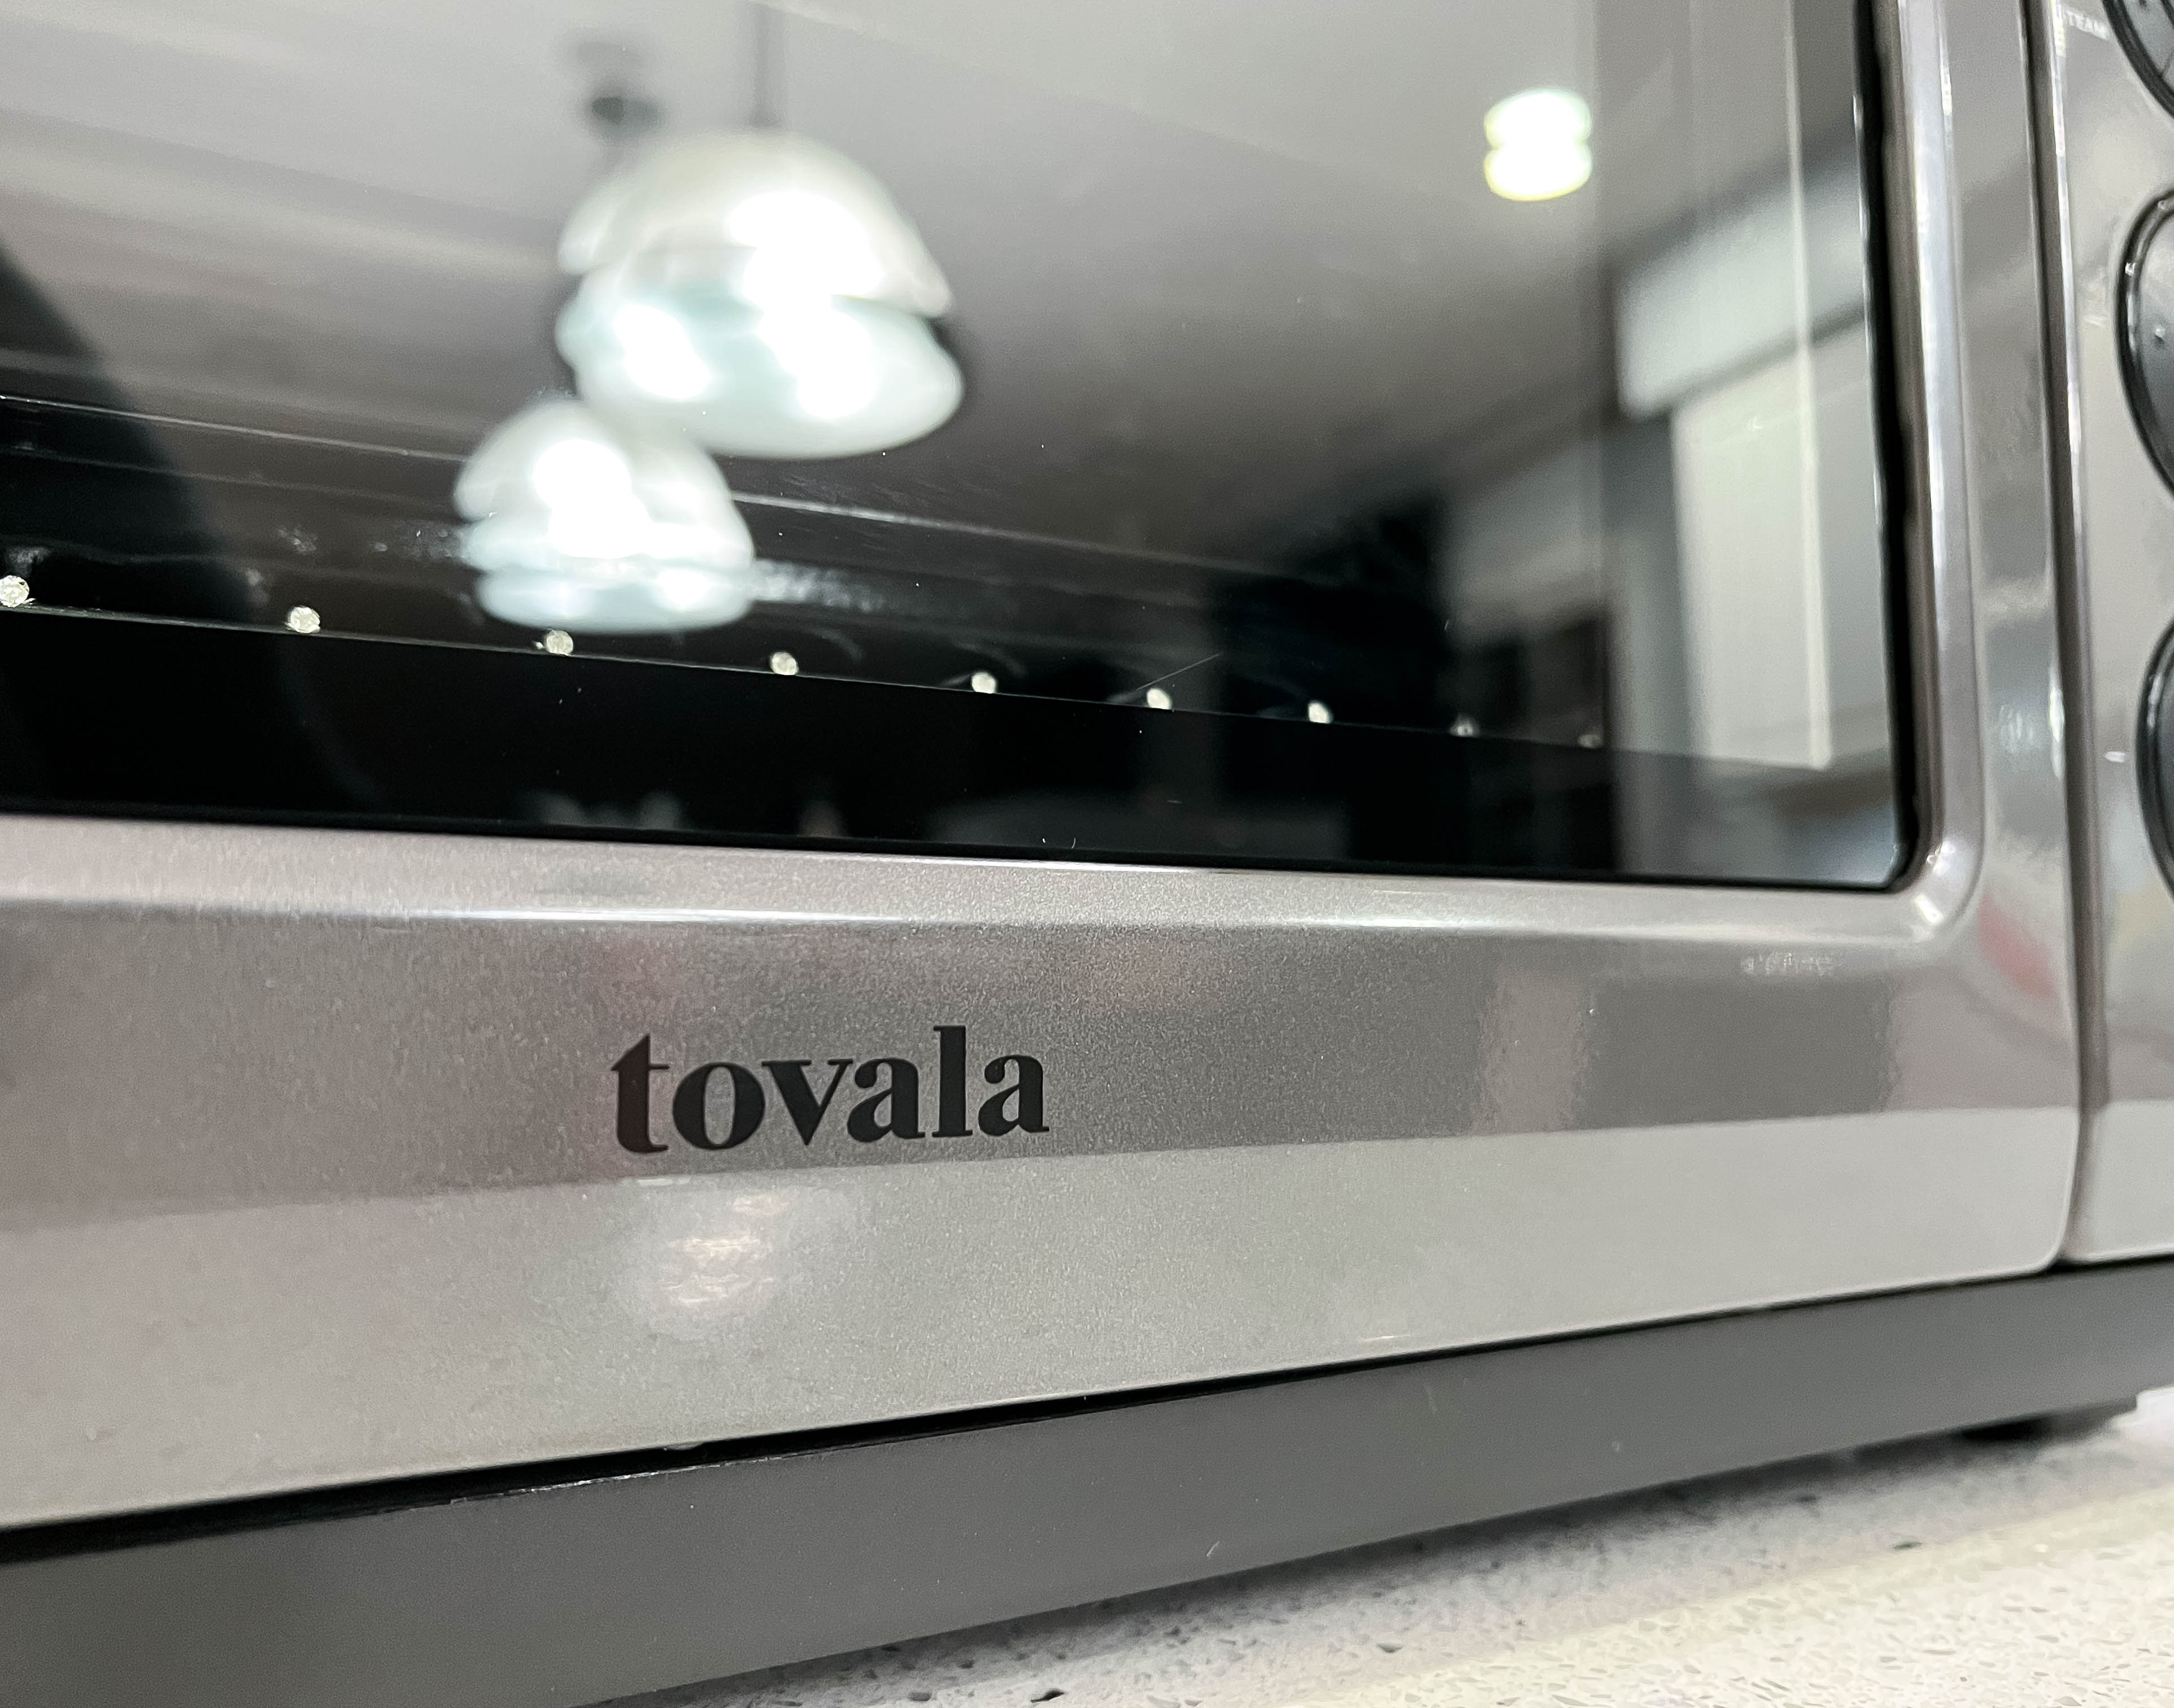 Tovala - Smart Oven. Fresh Meal Delivery Service. 1 Minute of Prep.